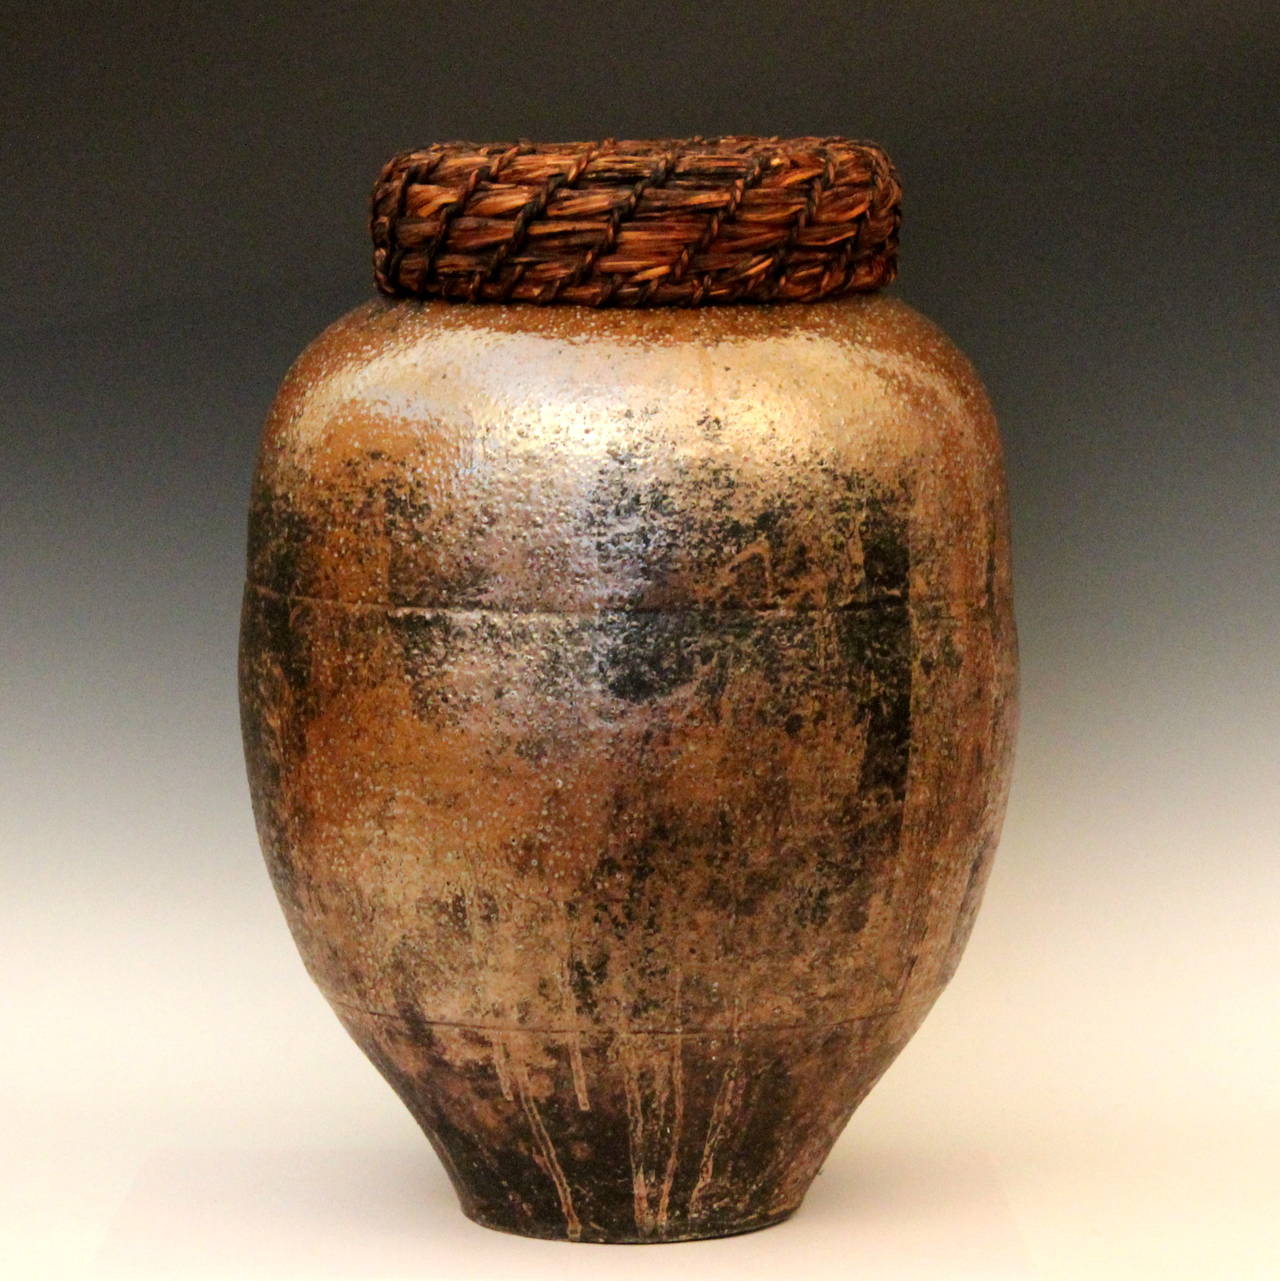 Antique large Shigaraki jar with brown and black ash glaze with great contrast and terrific wabi sabi feel, circa 1900. With old, maybe original, straw cover. 19